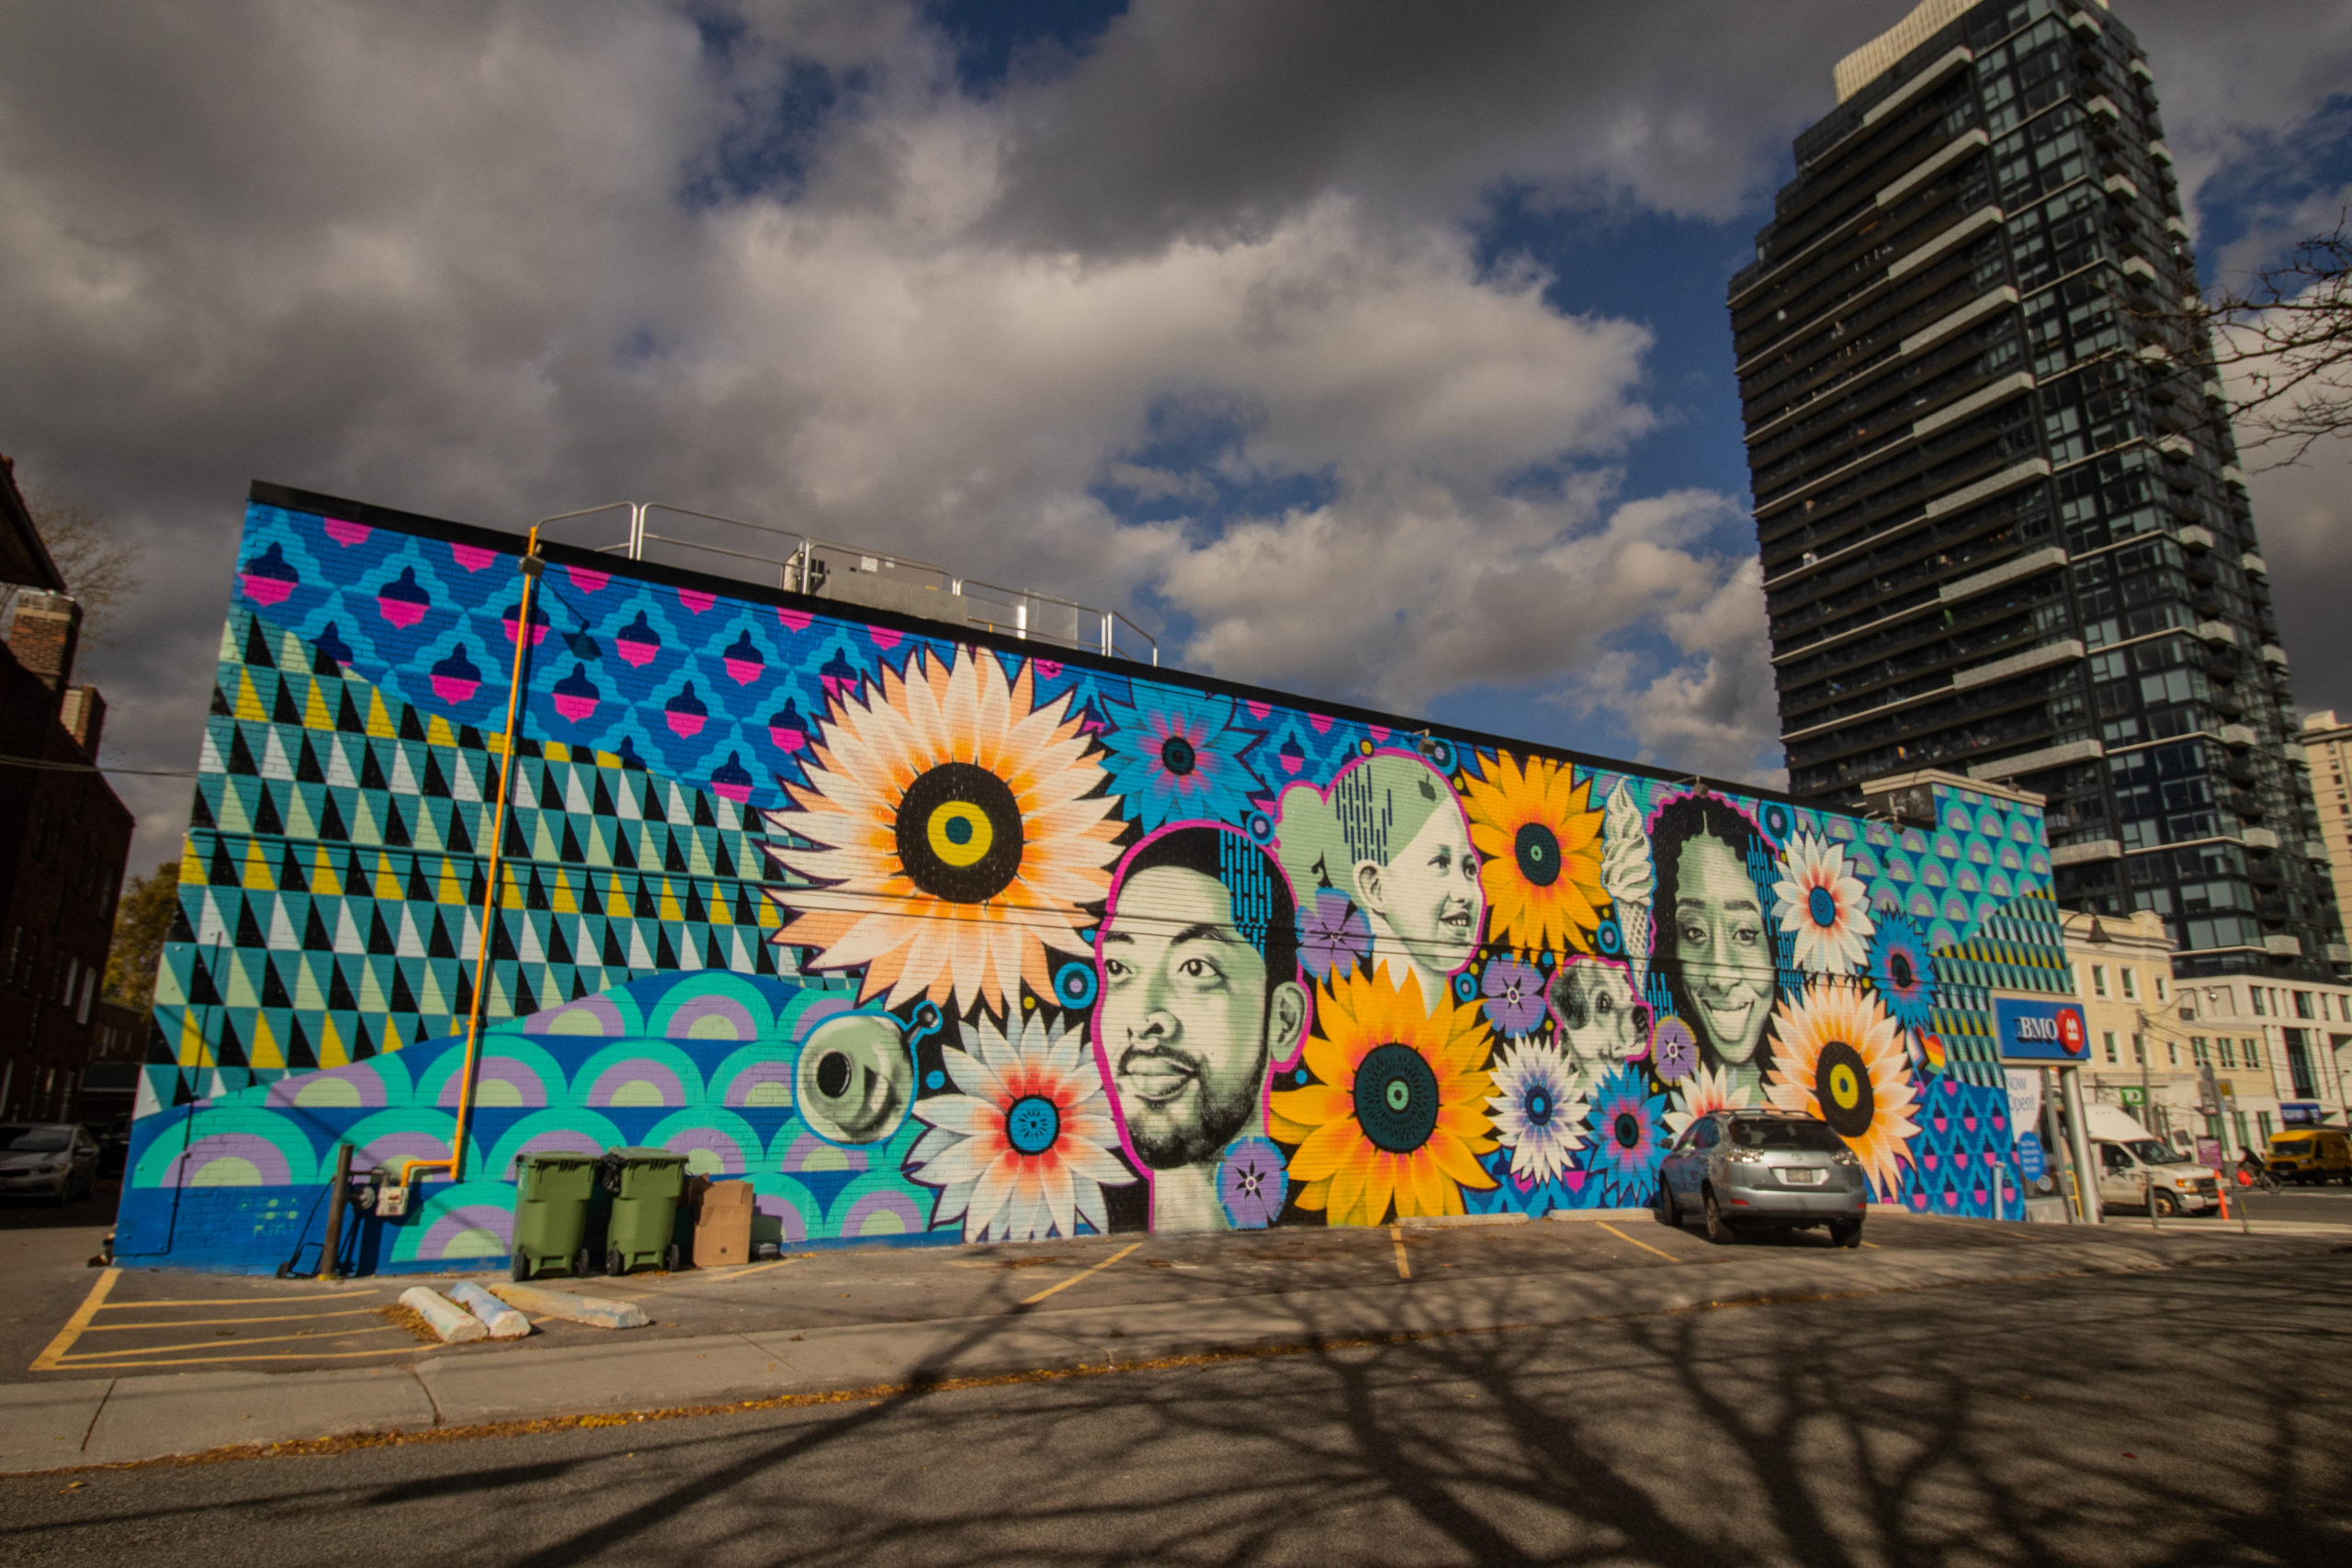 Photograph of Gosia's large-scale mural on the exterior wall of the BMO building, overlooking a parking lot. The mural features portraits of people in the community, animals, floral and geometric patterns.